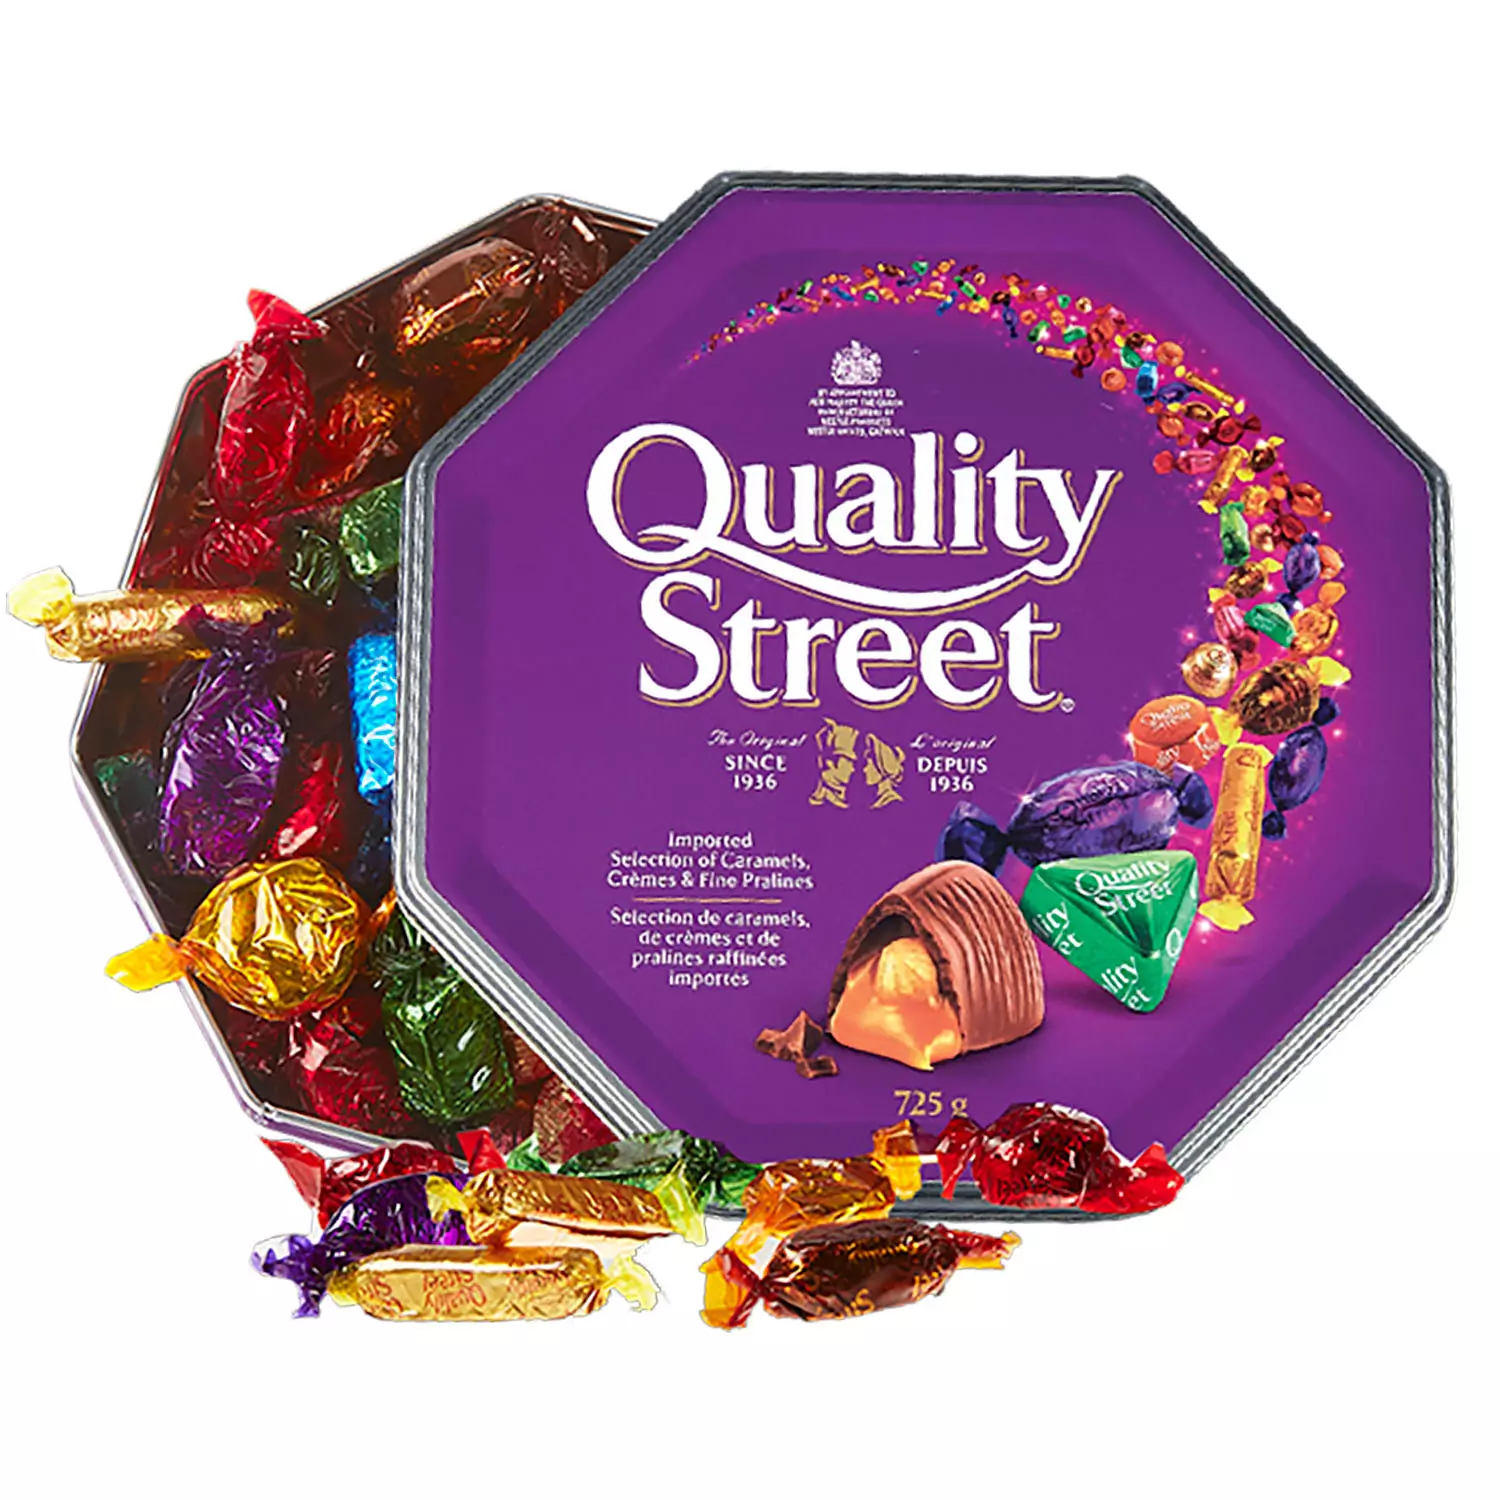 Quality Street - Imported selection of caramels, crèmes & fine pralines, 725g